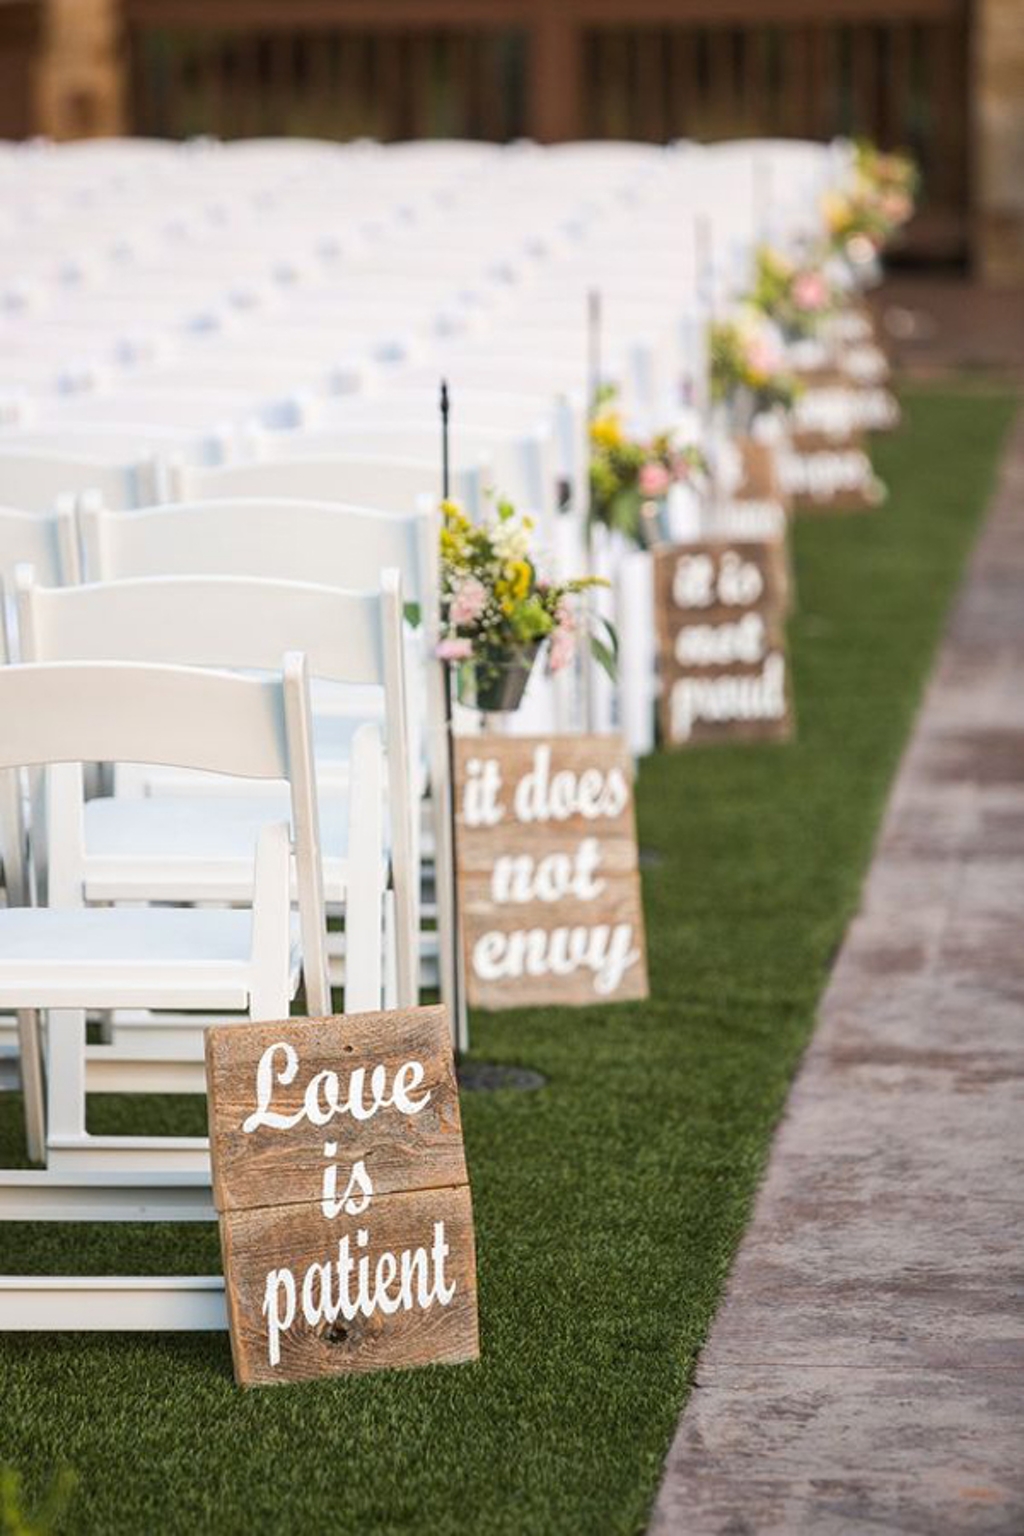 Cheap Outdoor Wedding Decoration Ideas Simple Wedding Aisle Decor Simple Weddingsle Decor Ideas Pictures For Kids Designs Cheap Outdoor cheap outdoor wedding decoration ideas|guidedecor.com